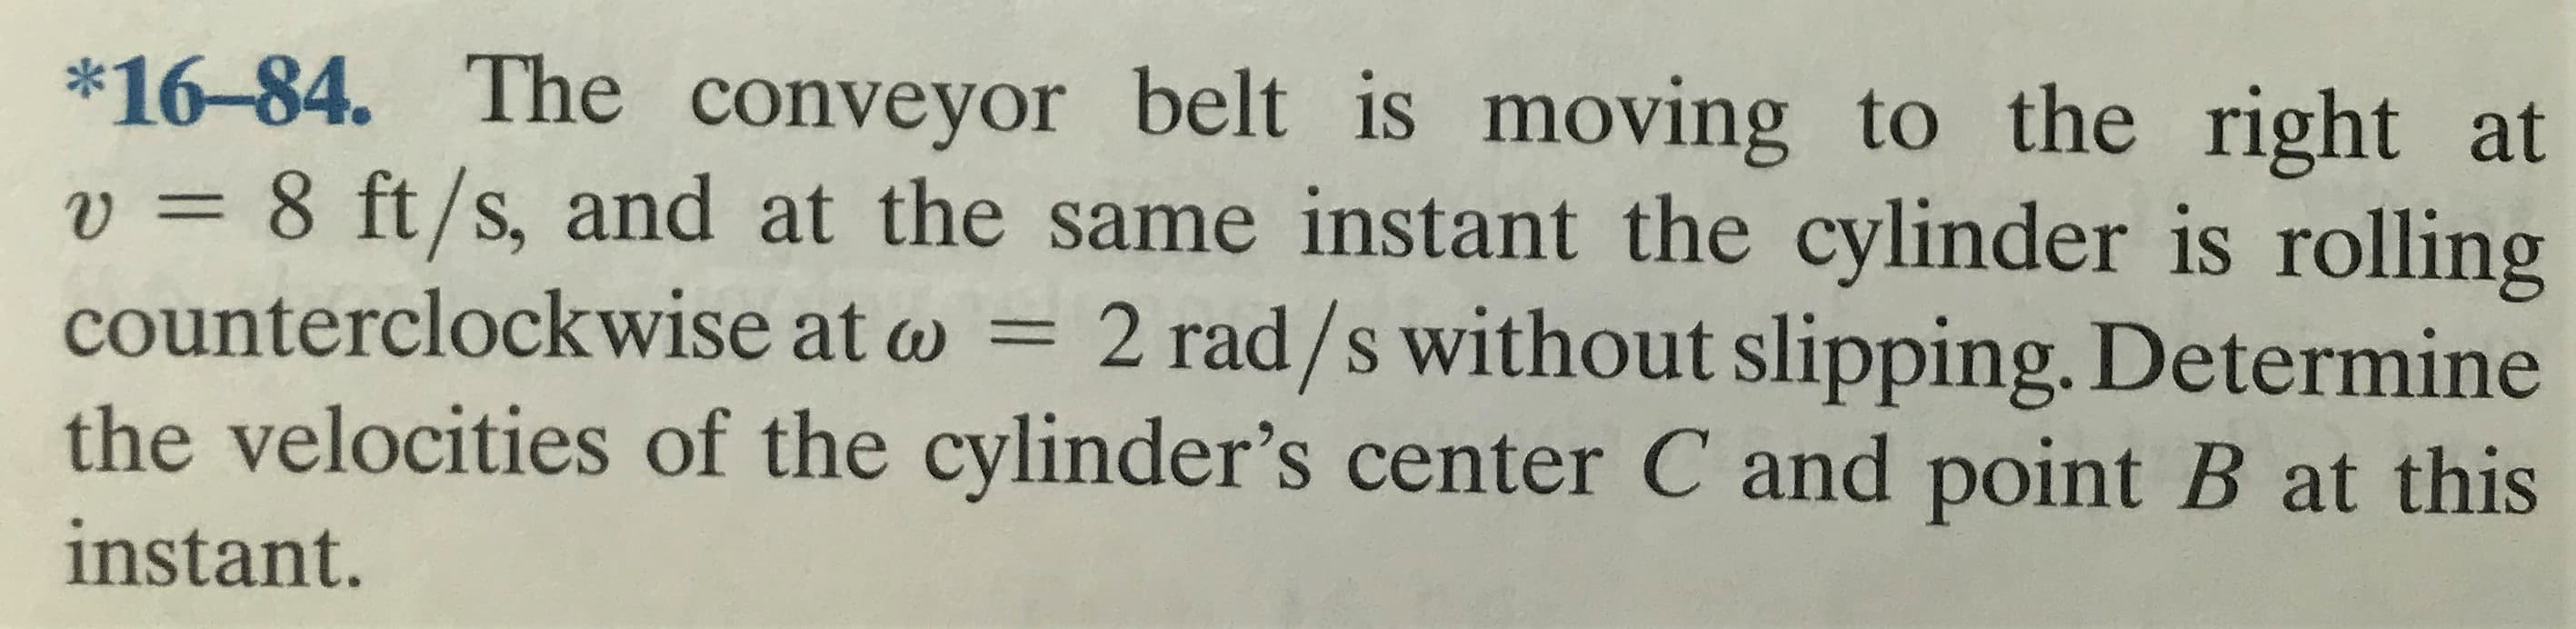 *16-84. The conveyor belt is moving to the right at
v = 8 ft/s, and at the same instant the cylinder is rolling
counterclockwise at w = 2 rad/s without slipping. Determine
the velocities of the cylinder's center C and point B at this
%3D
instant.
